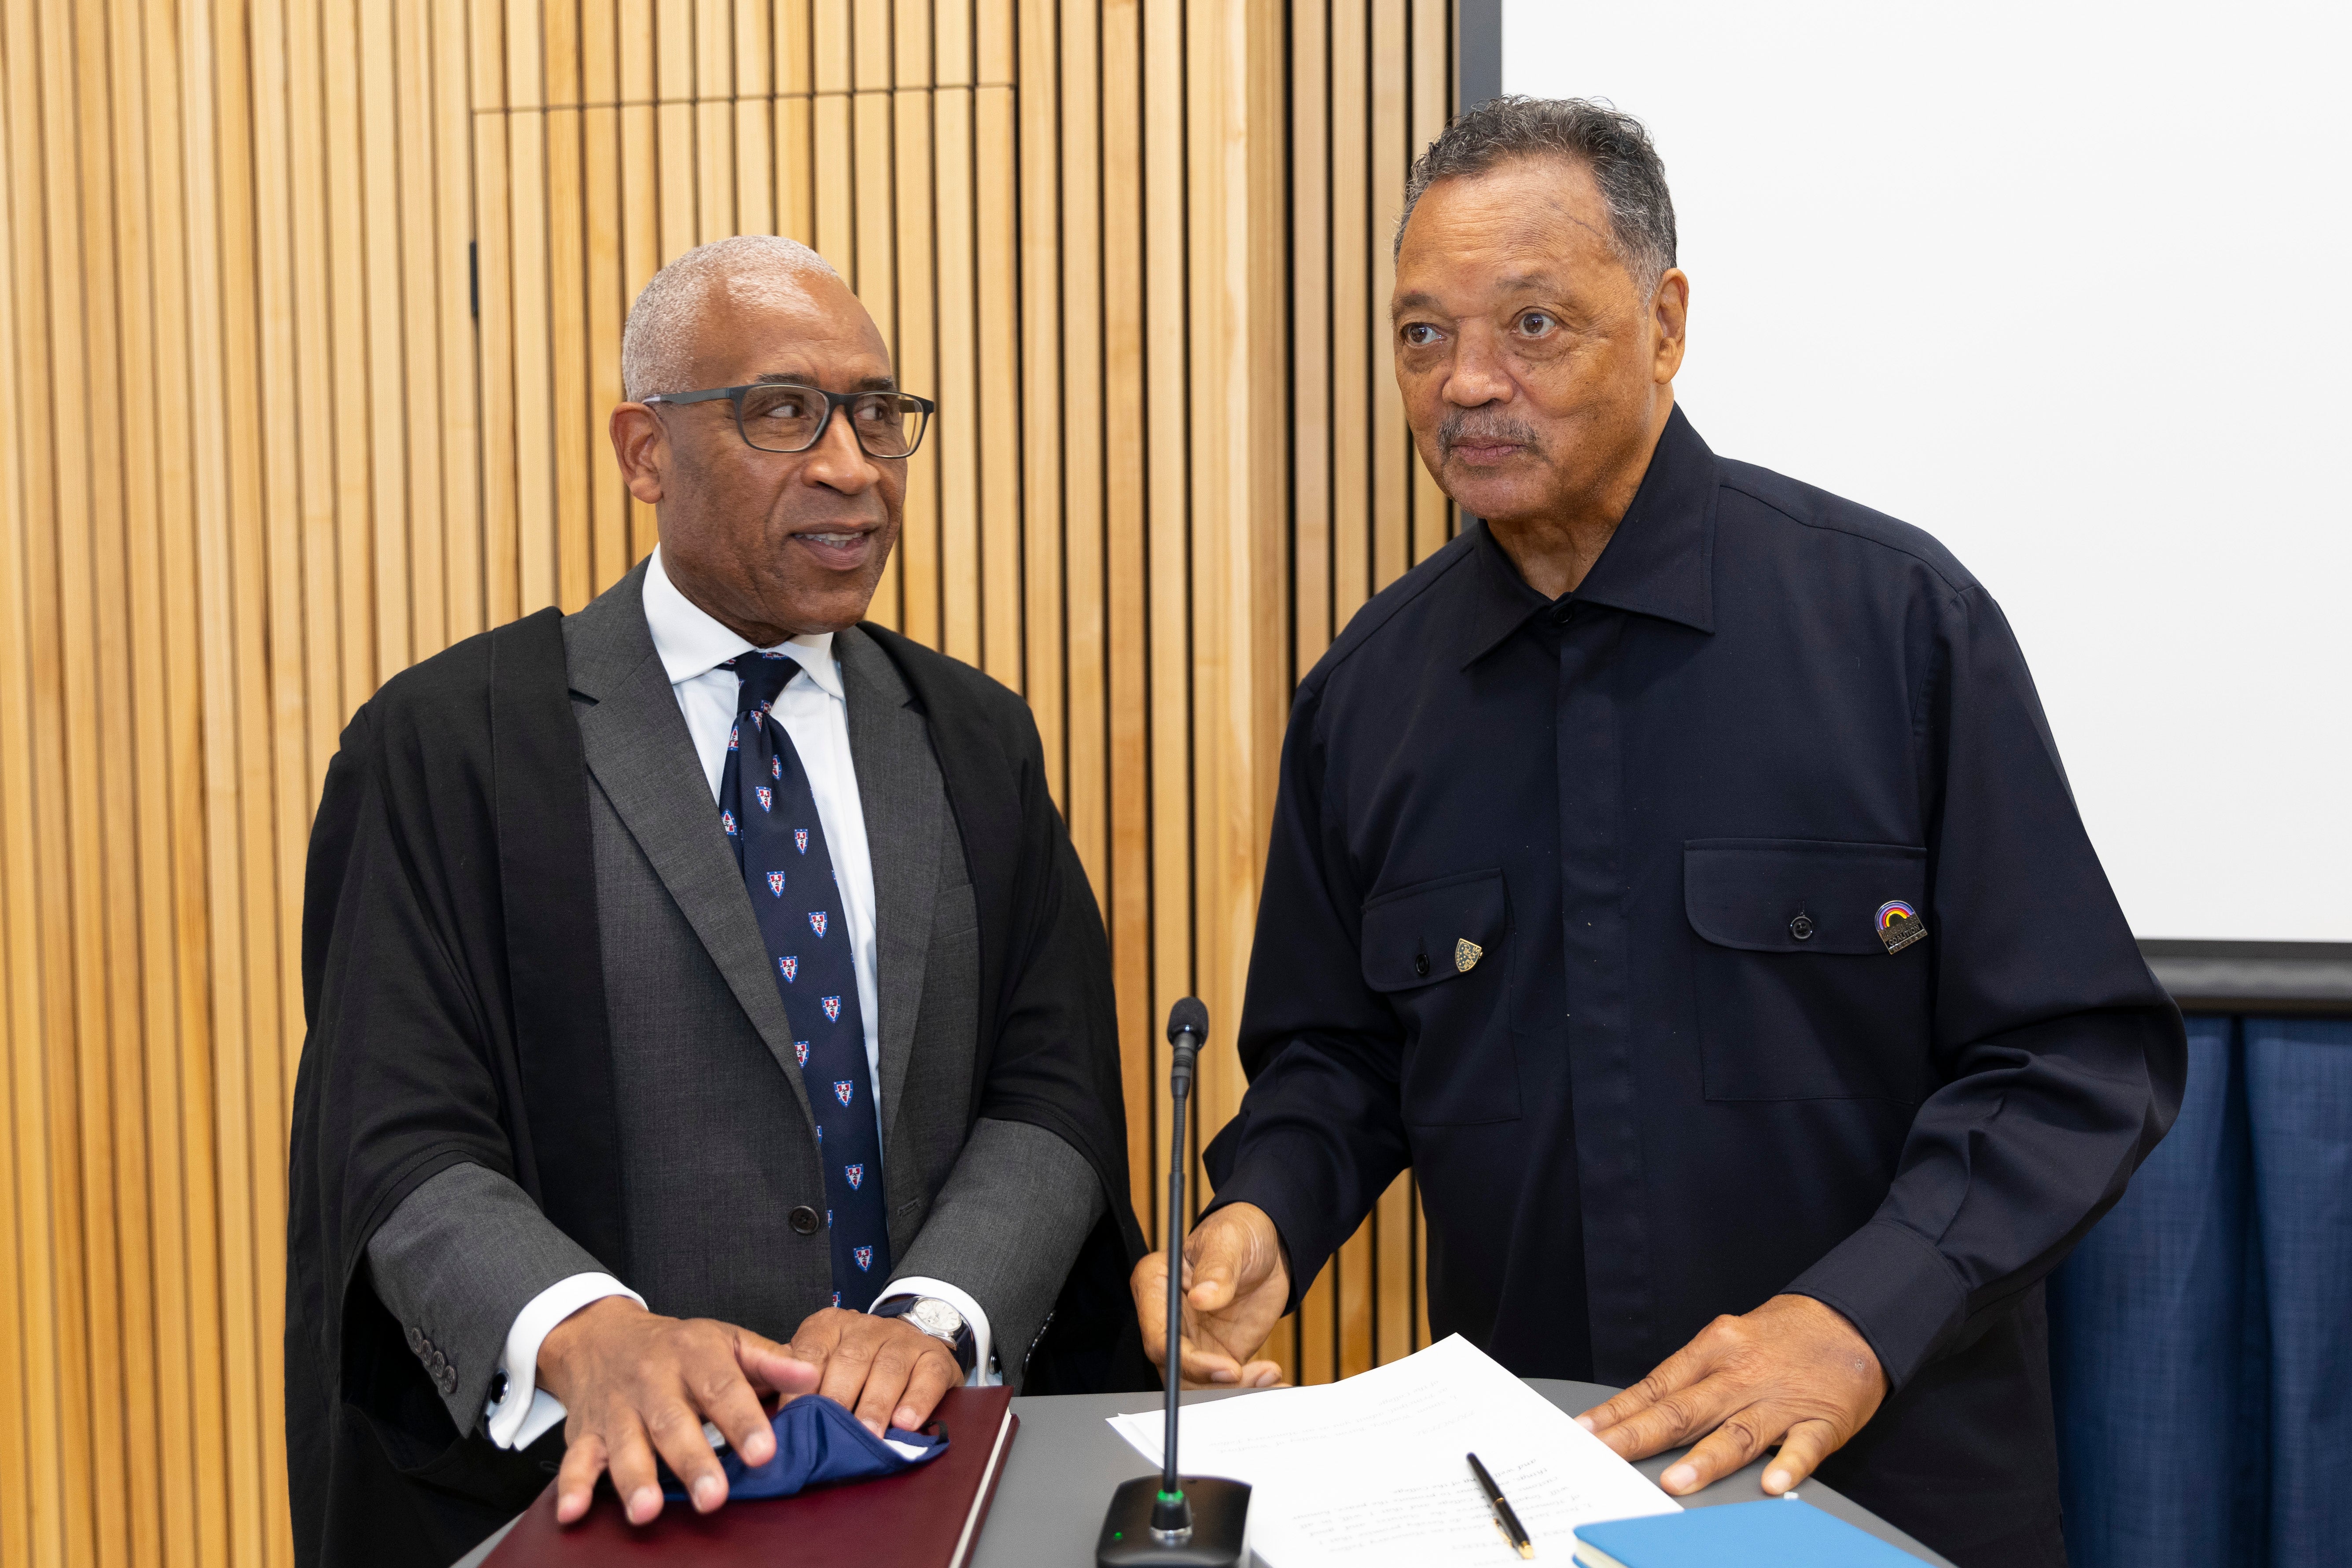 US civil rights activist Reverend Jesse Jackson has been made an honorary fellow of Cambridge’s Homerton College. He is pictured with the college’s principal Lord Woolley. (David Johnson/ PA)